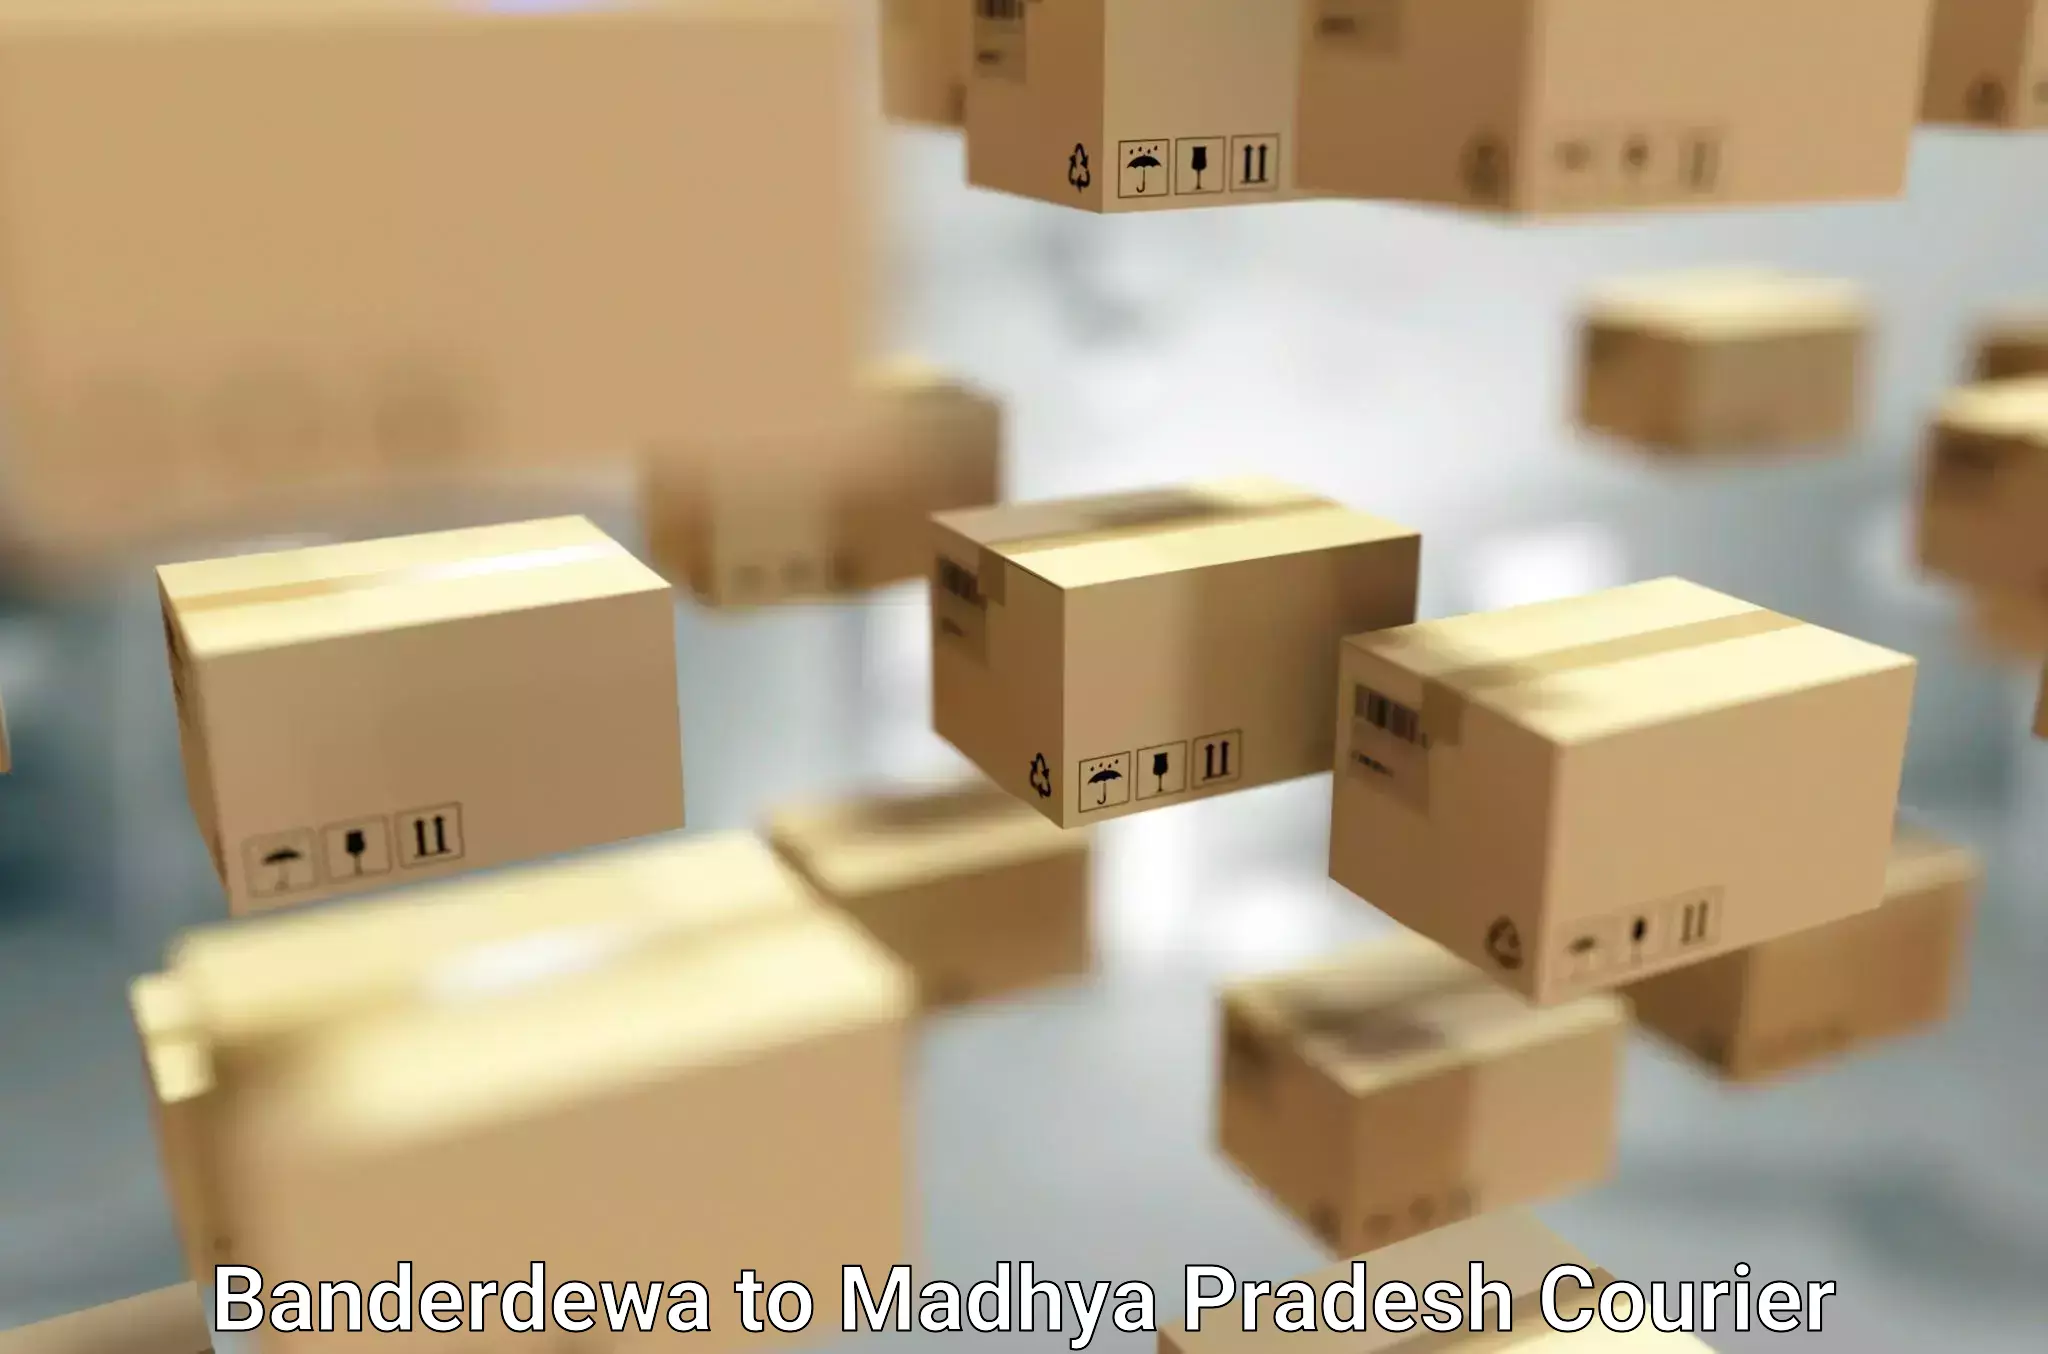 Quality relocation services Banderdewa to IIIT Bhopal